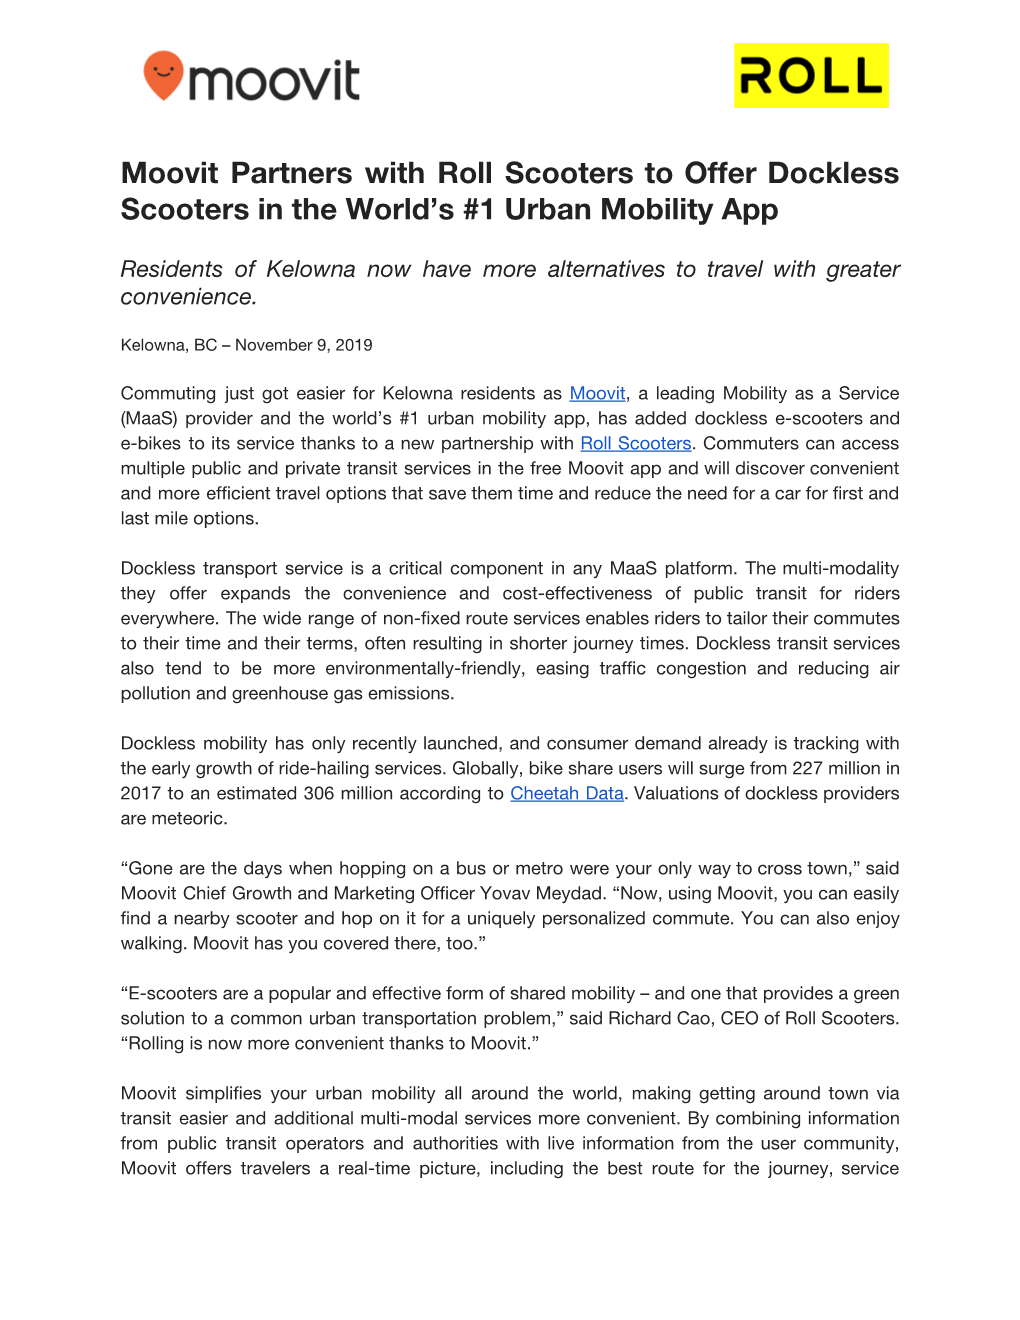 Moovit Partners with Roll Scooters to Offer Dockless Scooters in the World’S #1 Urban Mobility App